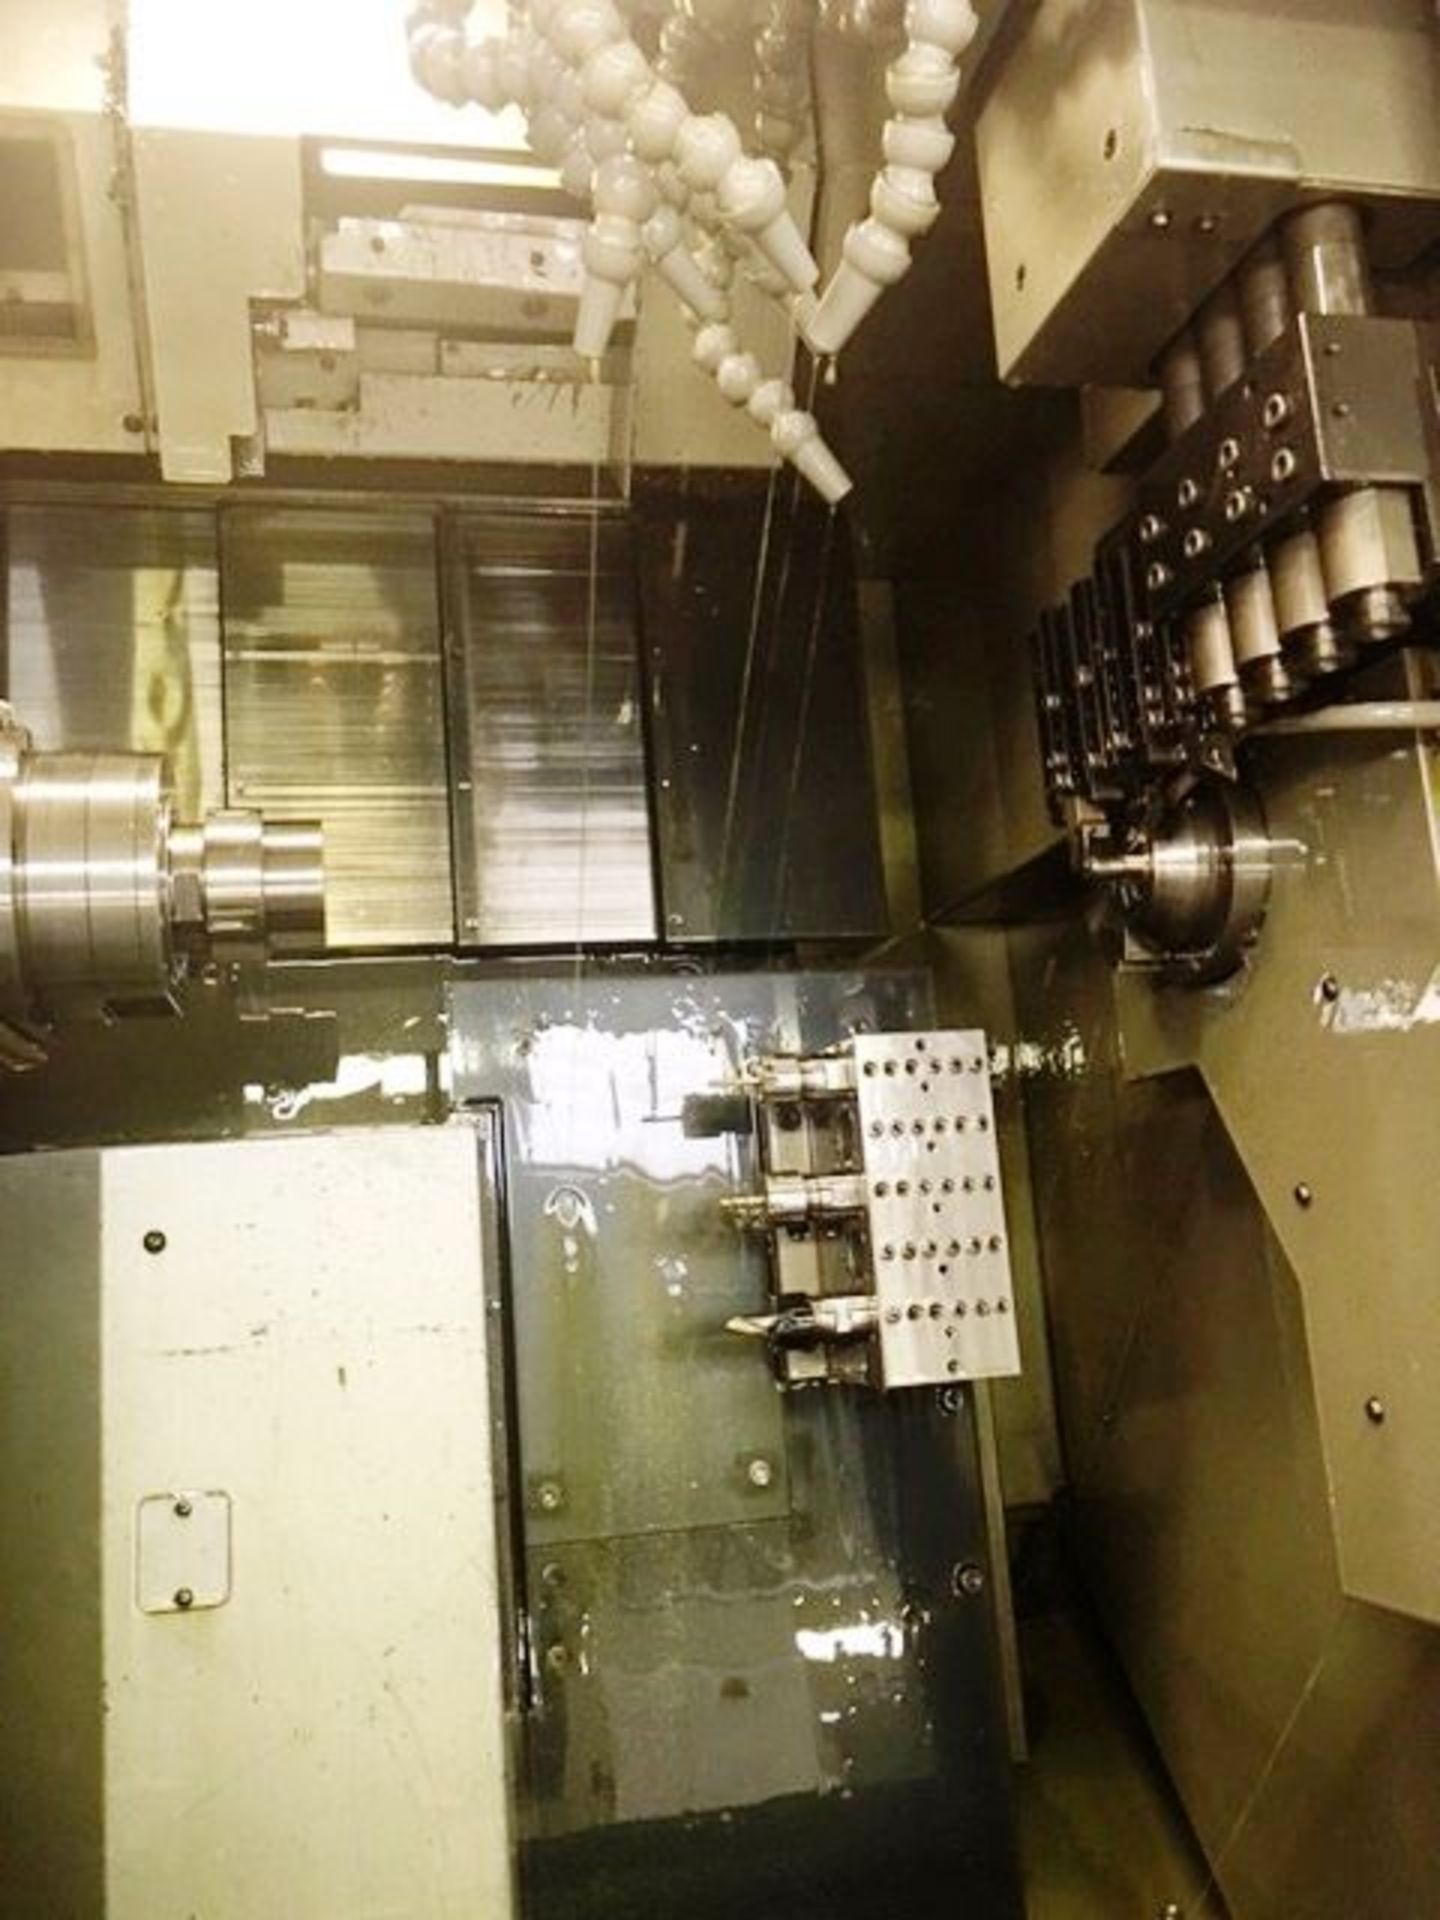 32mm Citizen C32-VIII Swiss Type Sliding Headstock CNC Automatic Lathe, S/N X12231, New 2007 General - Image 3 of 11